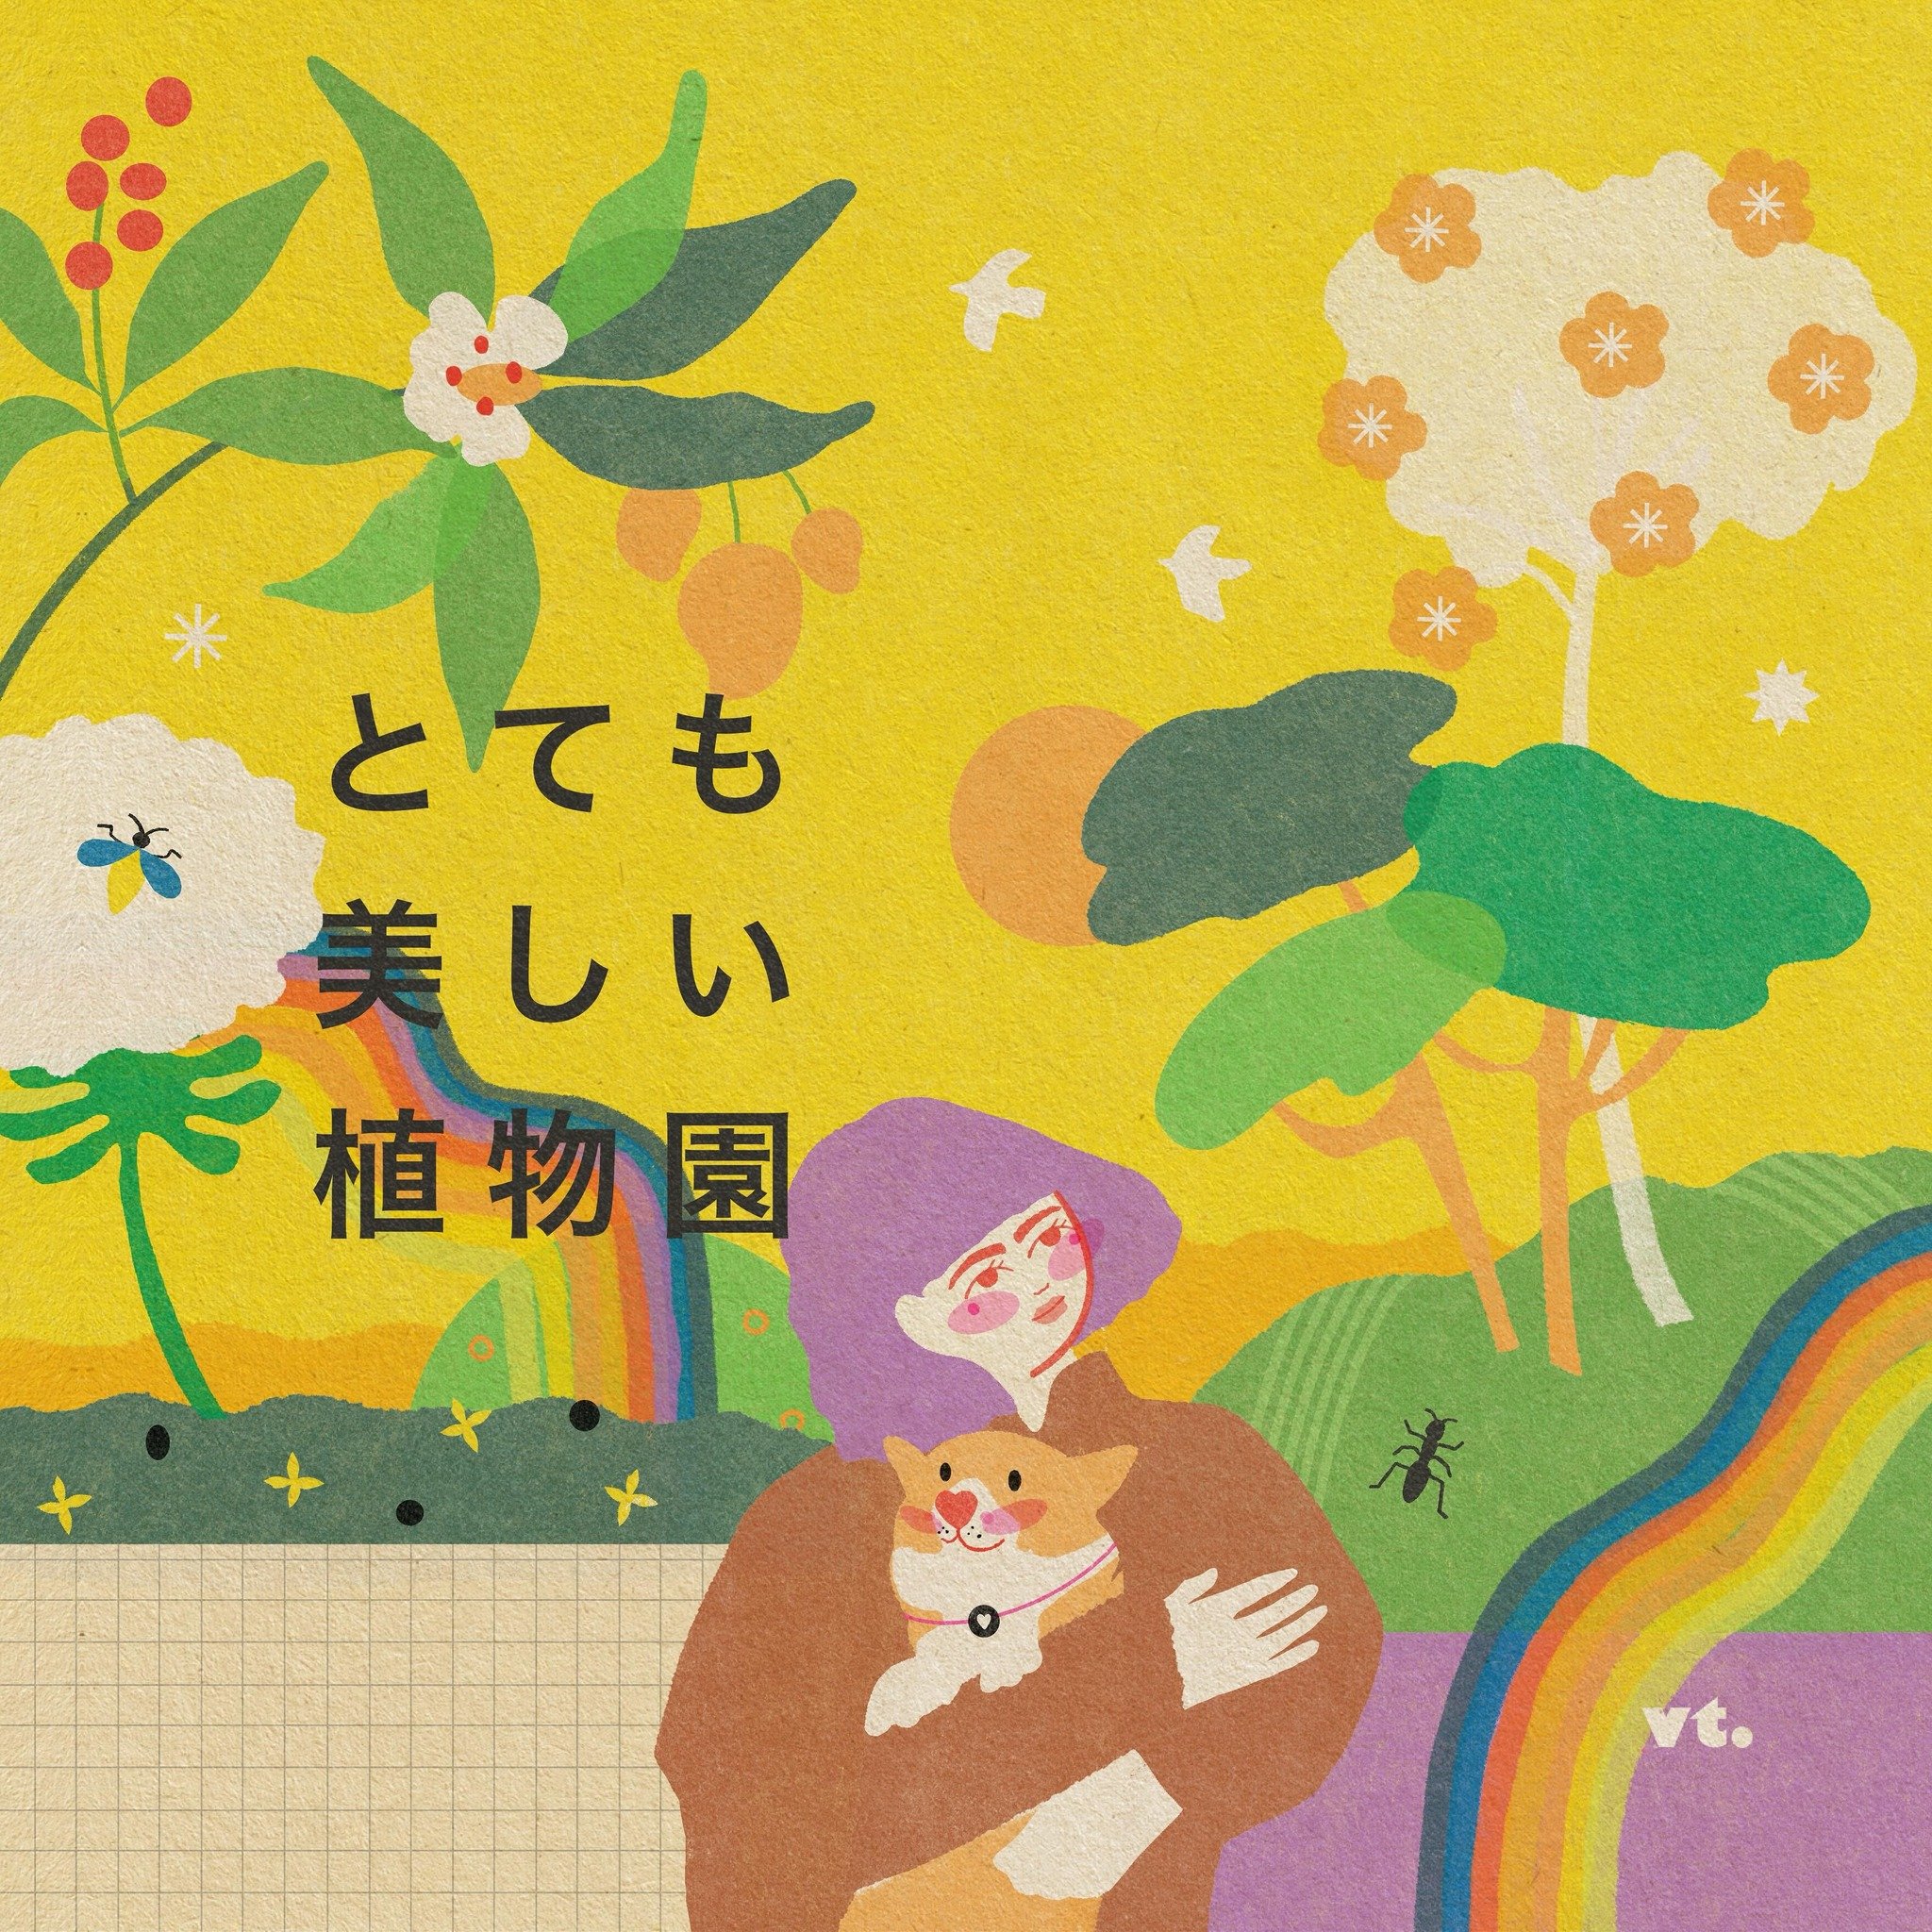 Beautiful Botanical Garden 🪴🌷

My first attempt to draw so many colors &amp; elements in one image, that always tough for me not doing messy work and finishing it in right time.

Also I added the text in Japanese language, yeah I love they are lett